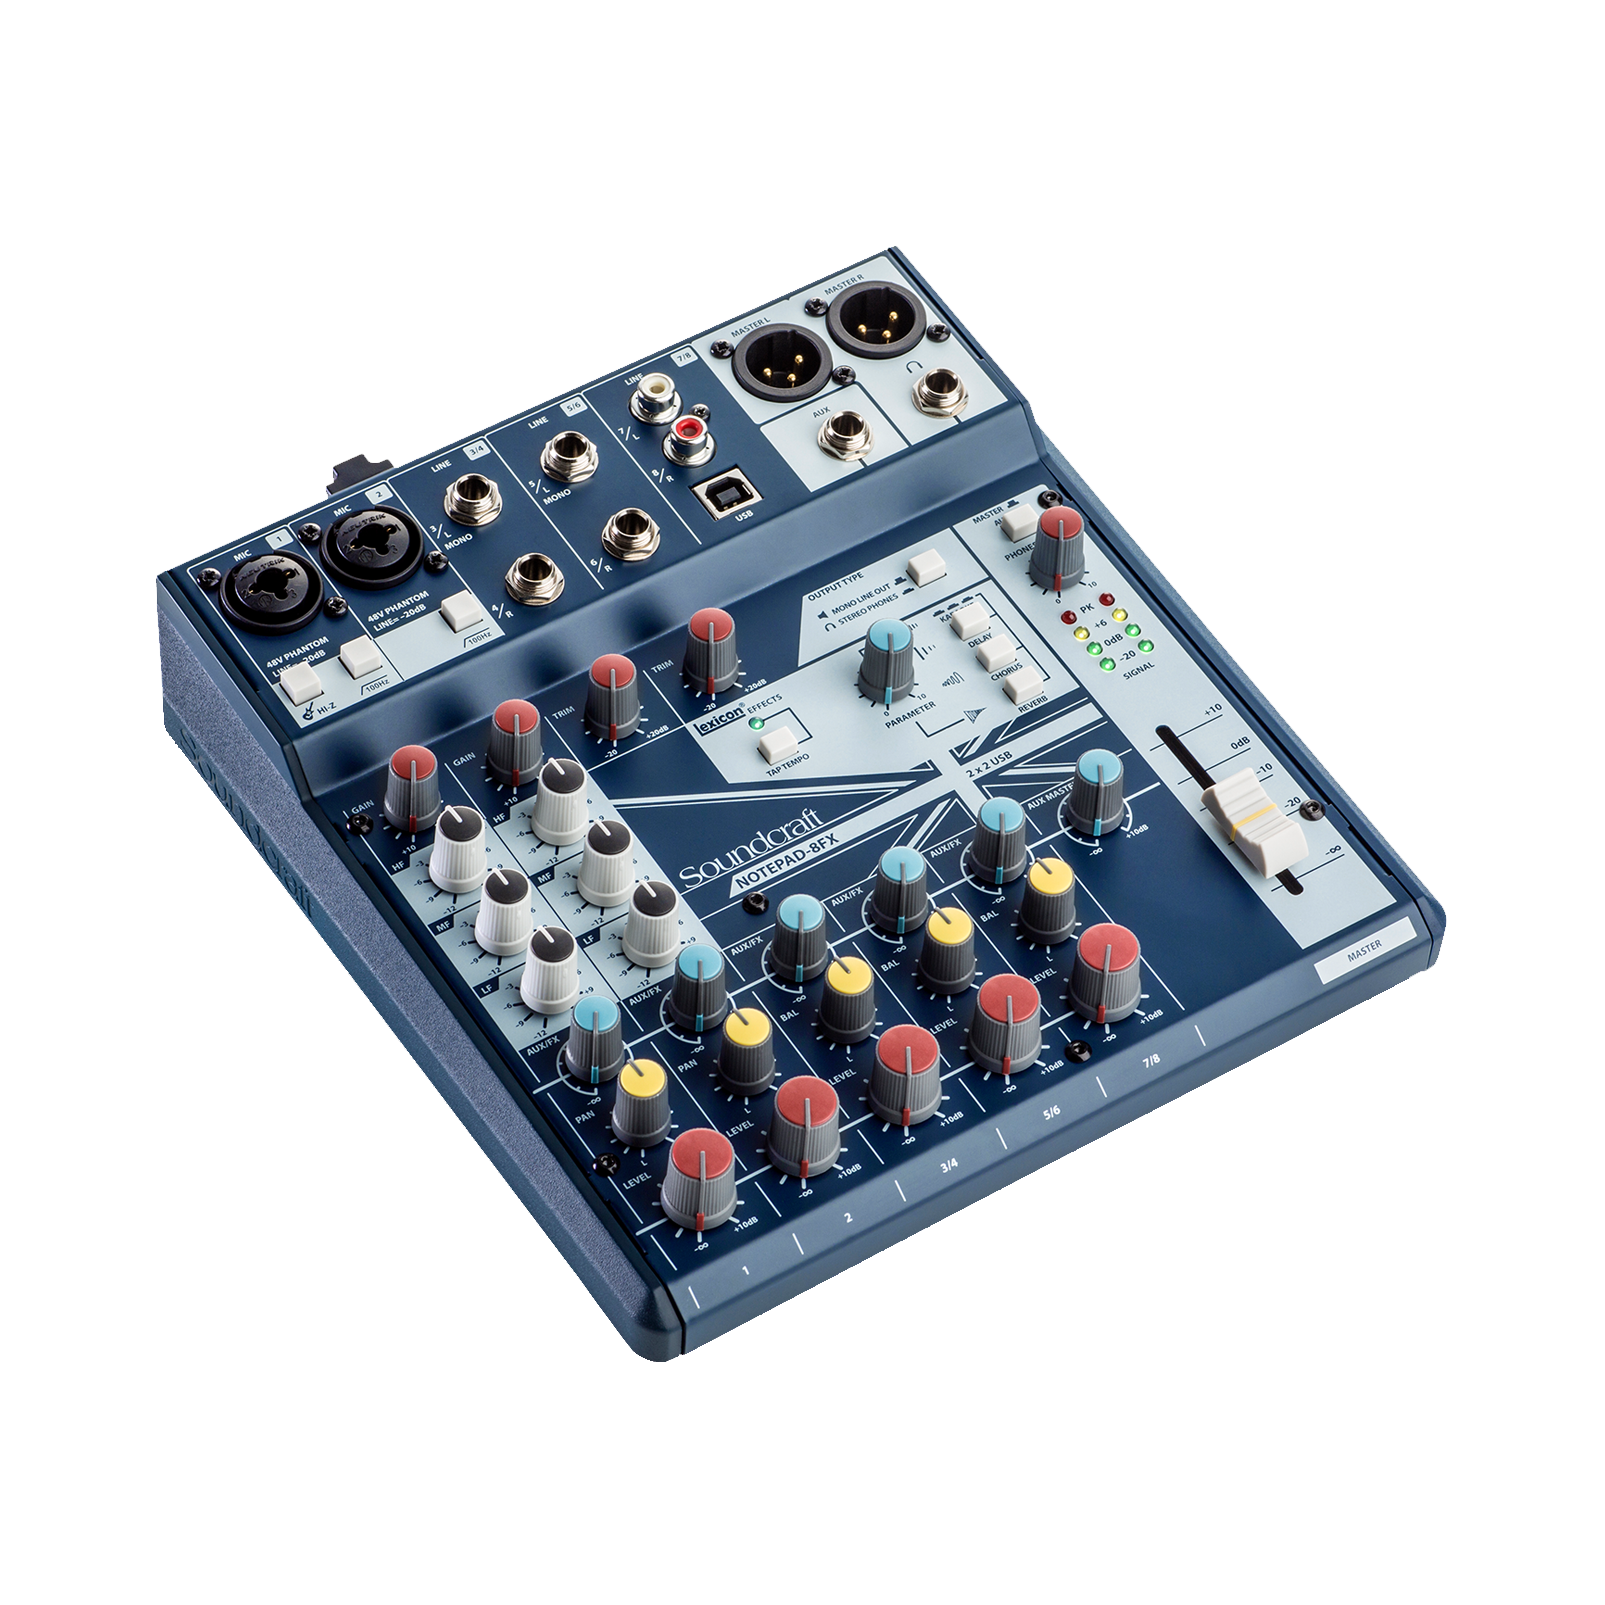 Notepad-8FX (B-Stock) - Dark Blue - Small-format analog mixing console with USB I/O and Lexicon effects - Hero